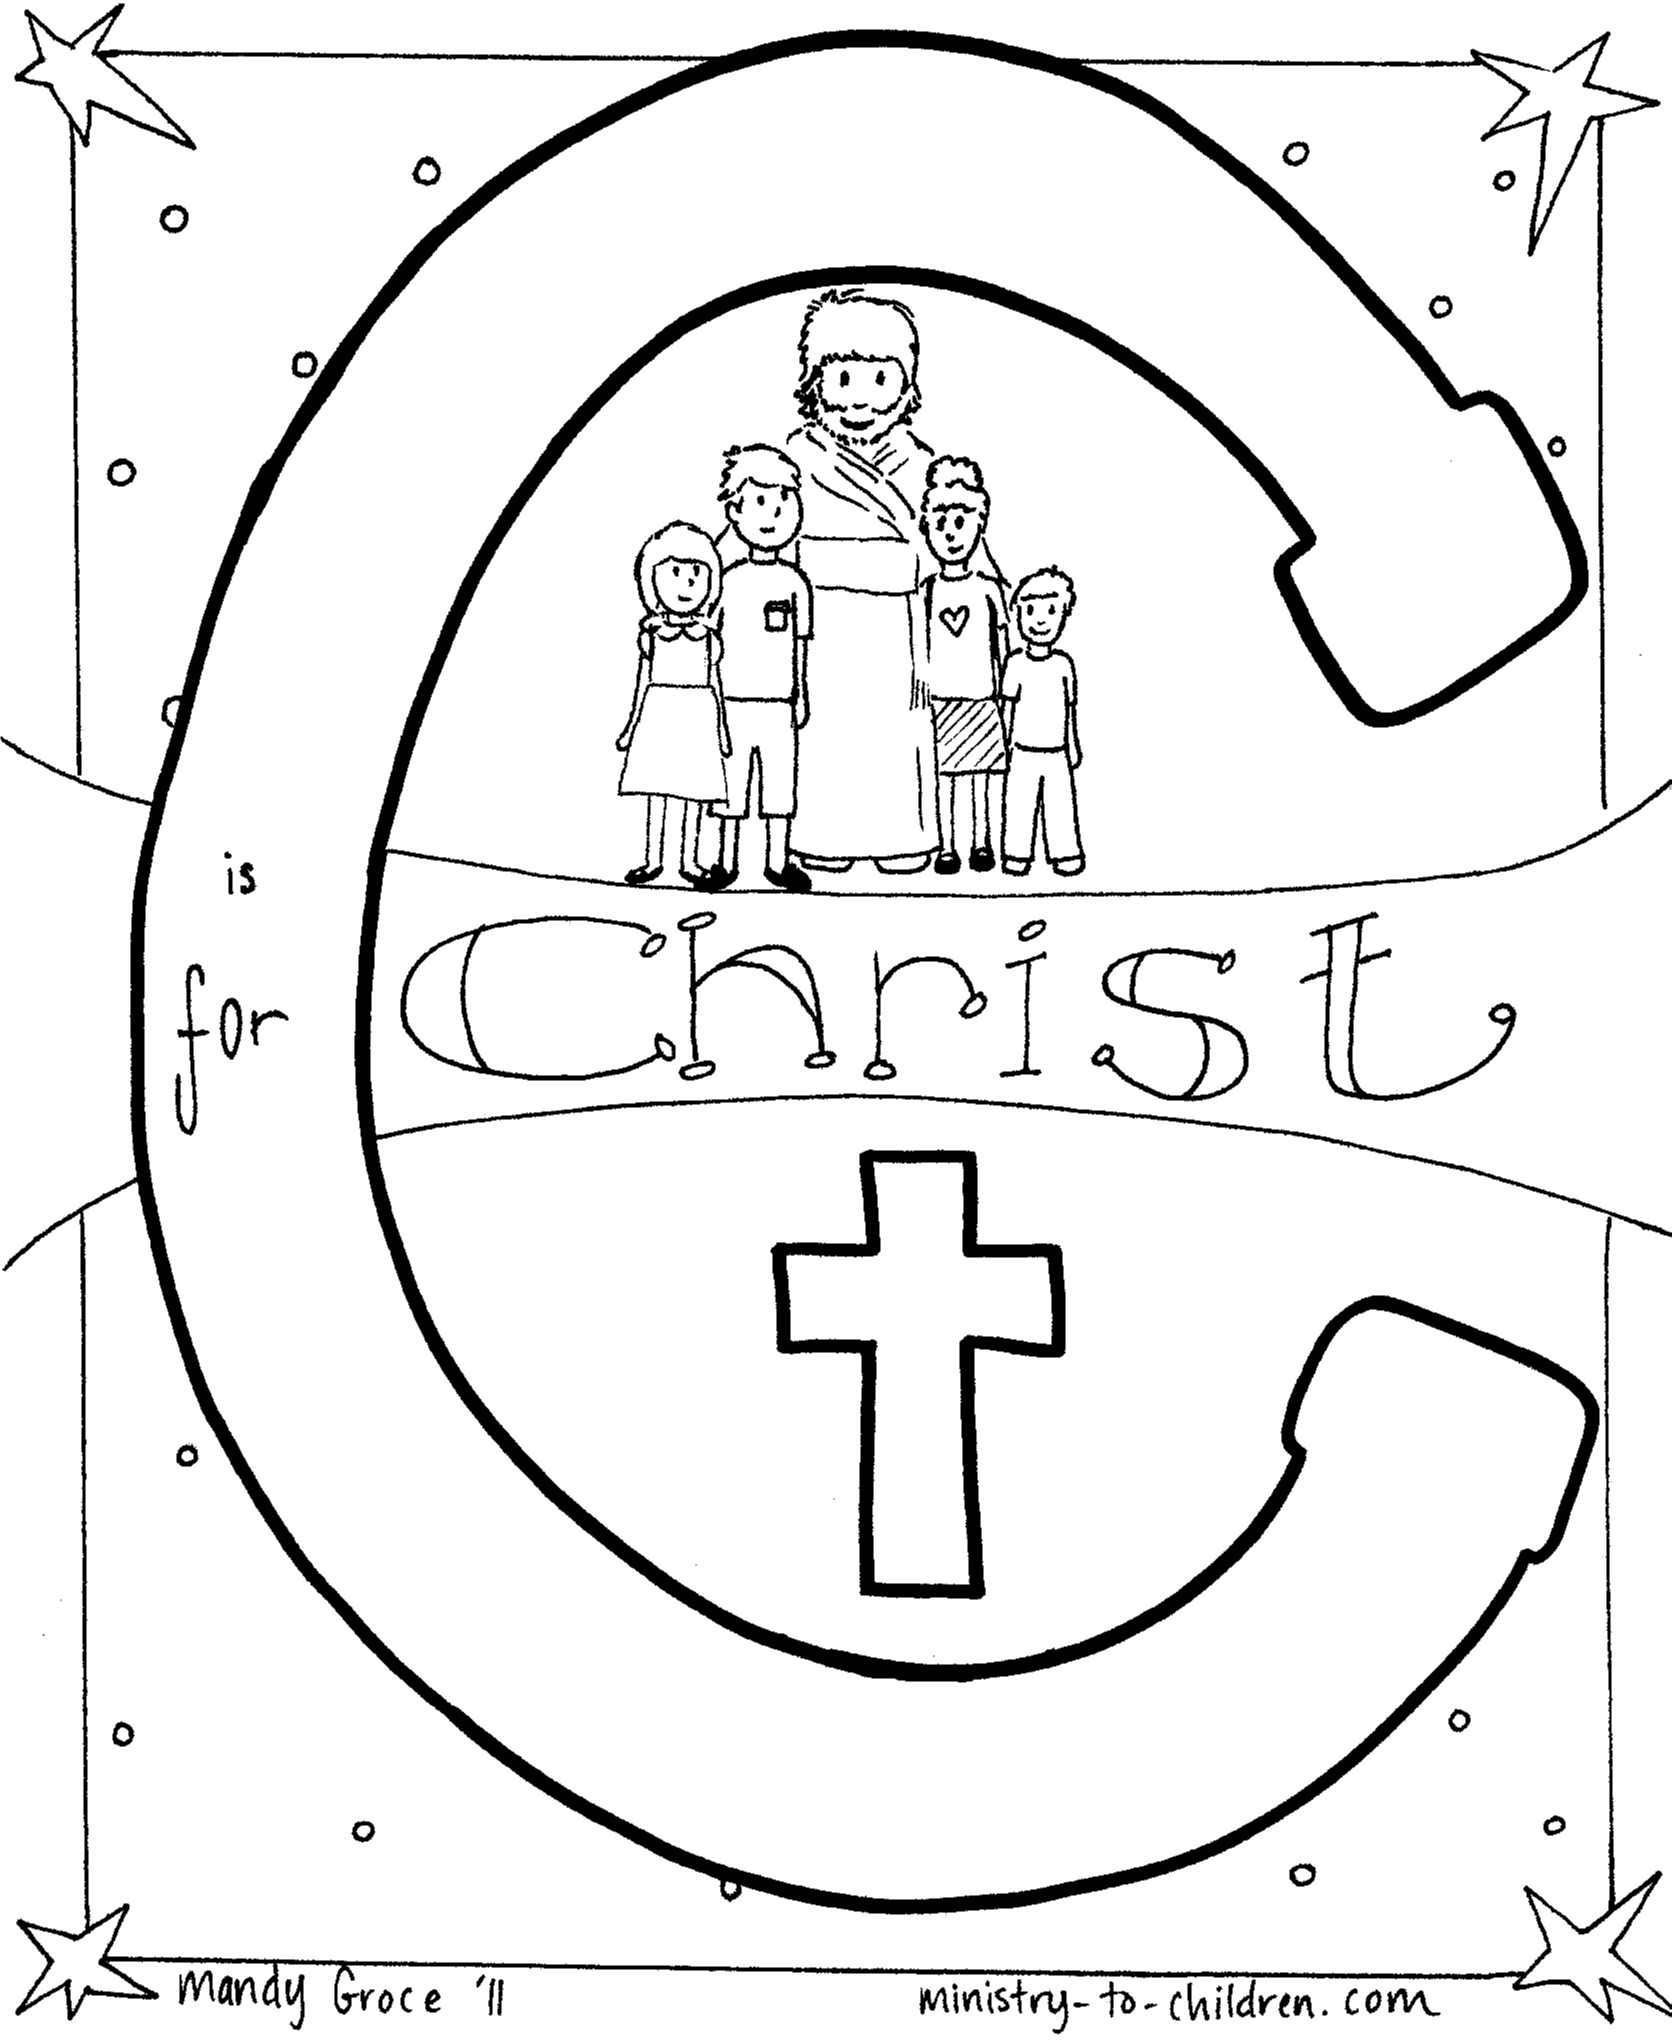 11 Best Images of C Is For Christmas Worksheet - Christmas Tree